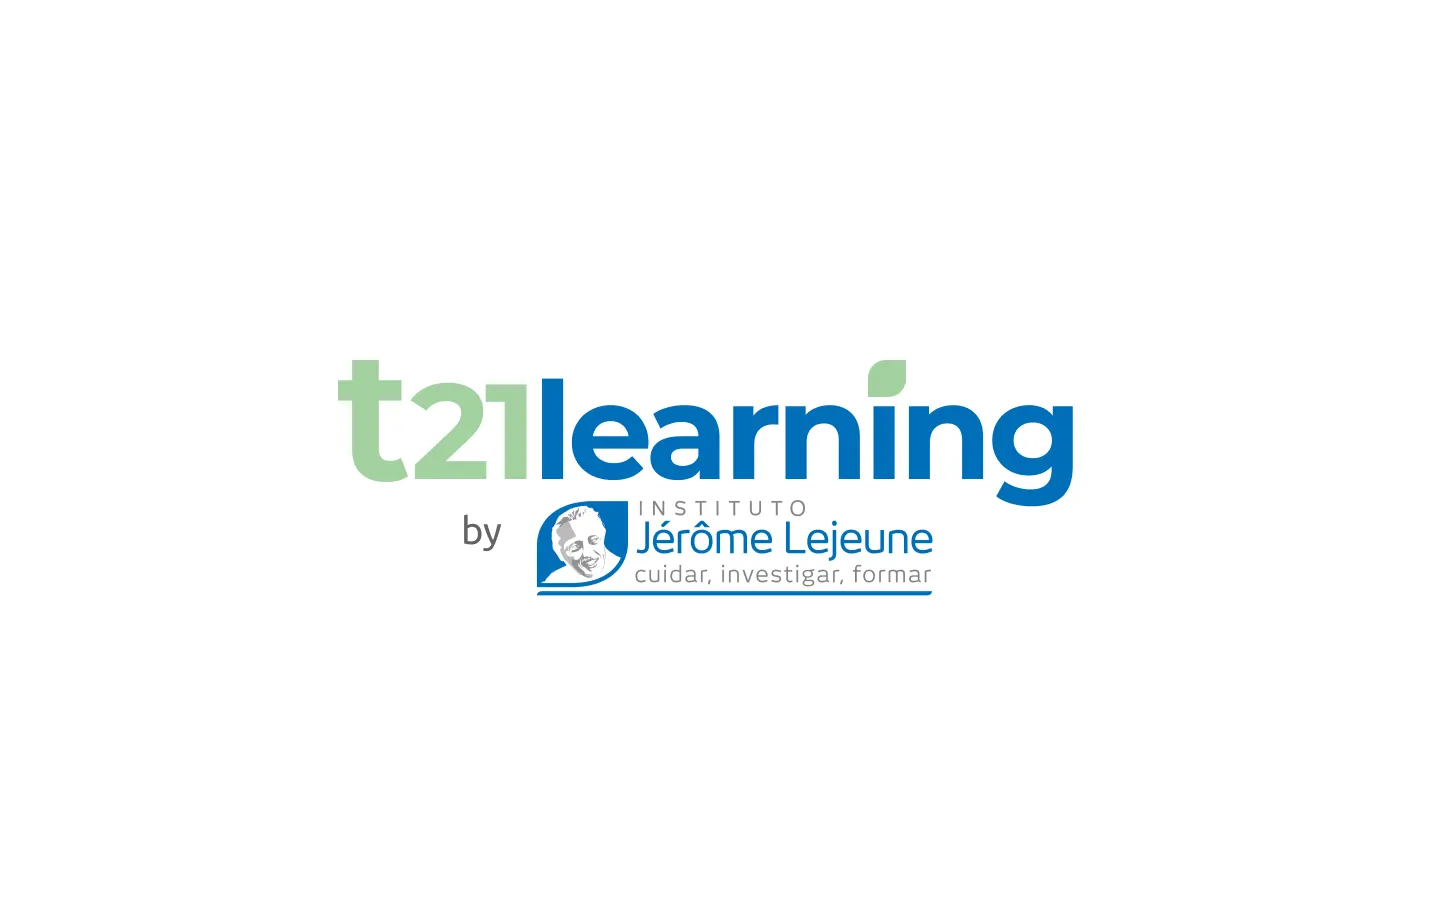 T21learning Es